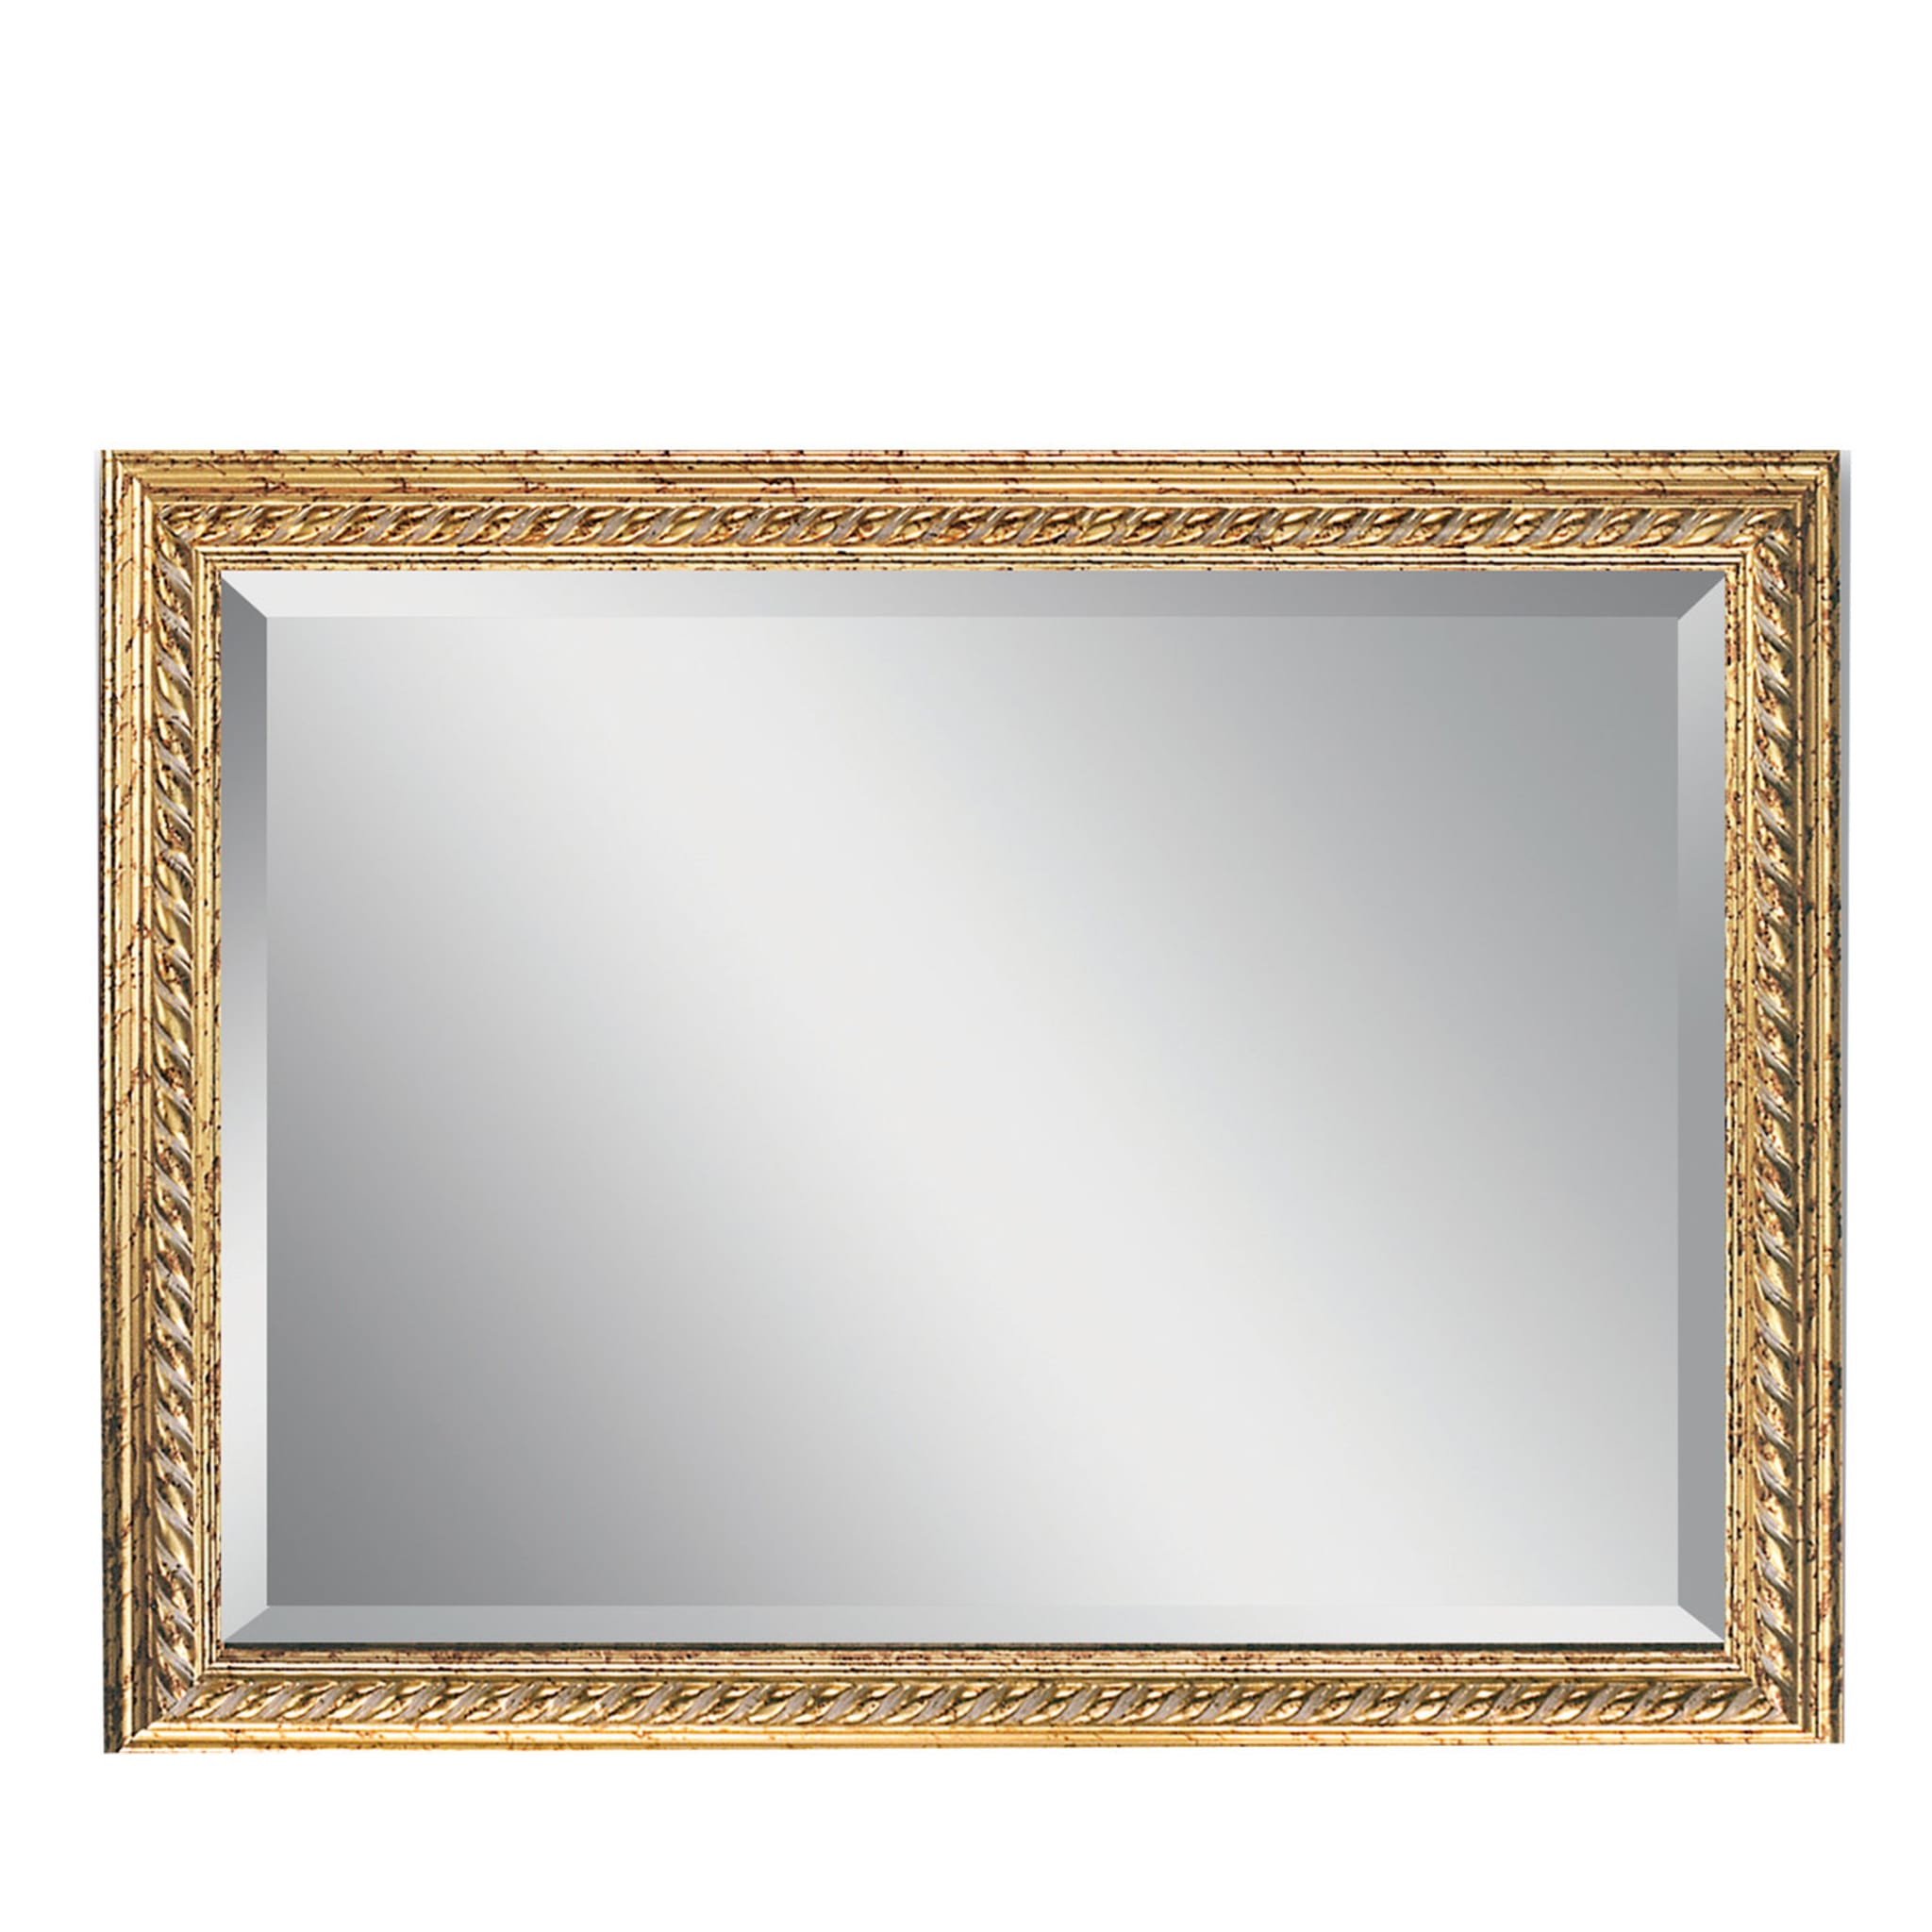 Rectangular Mirror with Wooden Frame - Main view